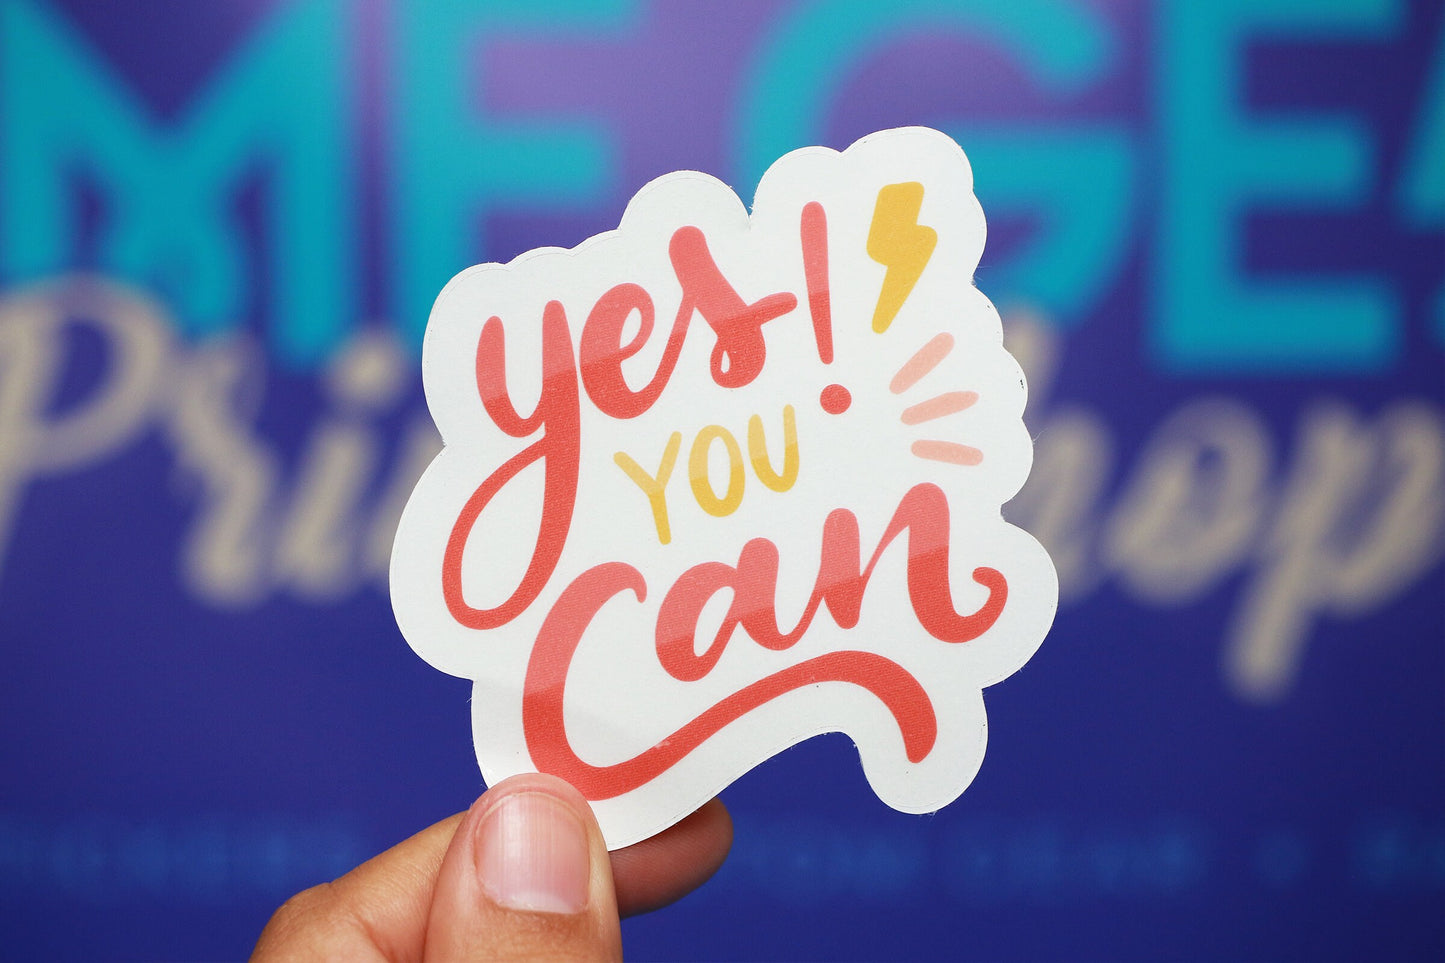 Sticker - Yes you can 